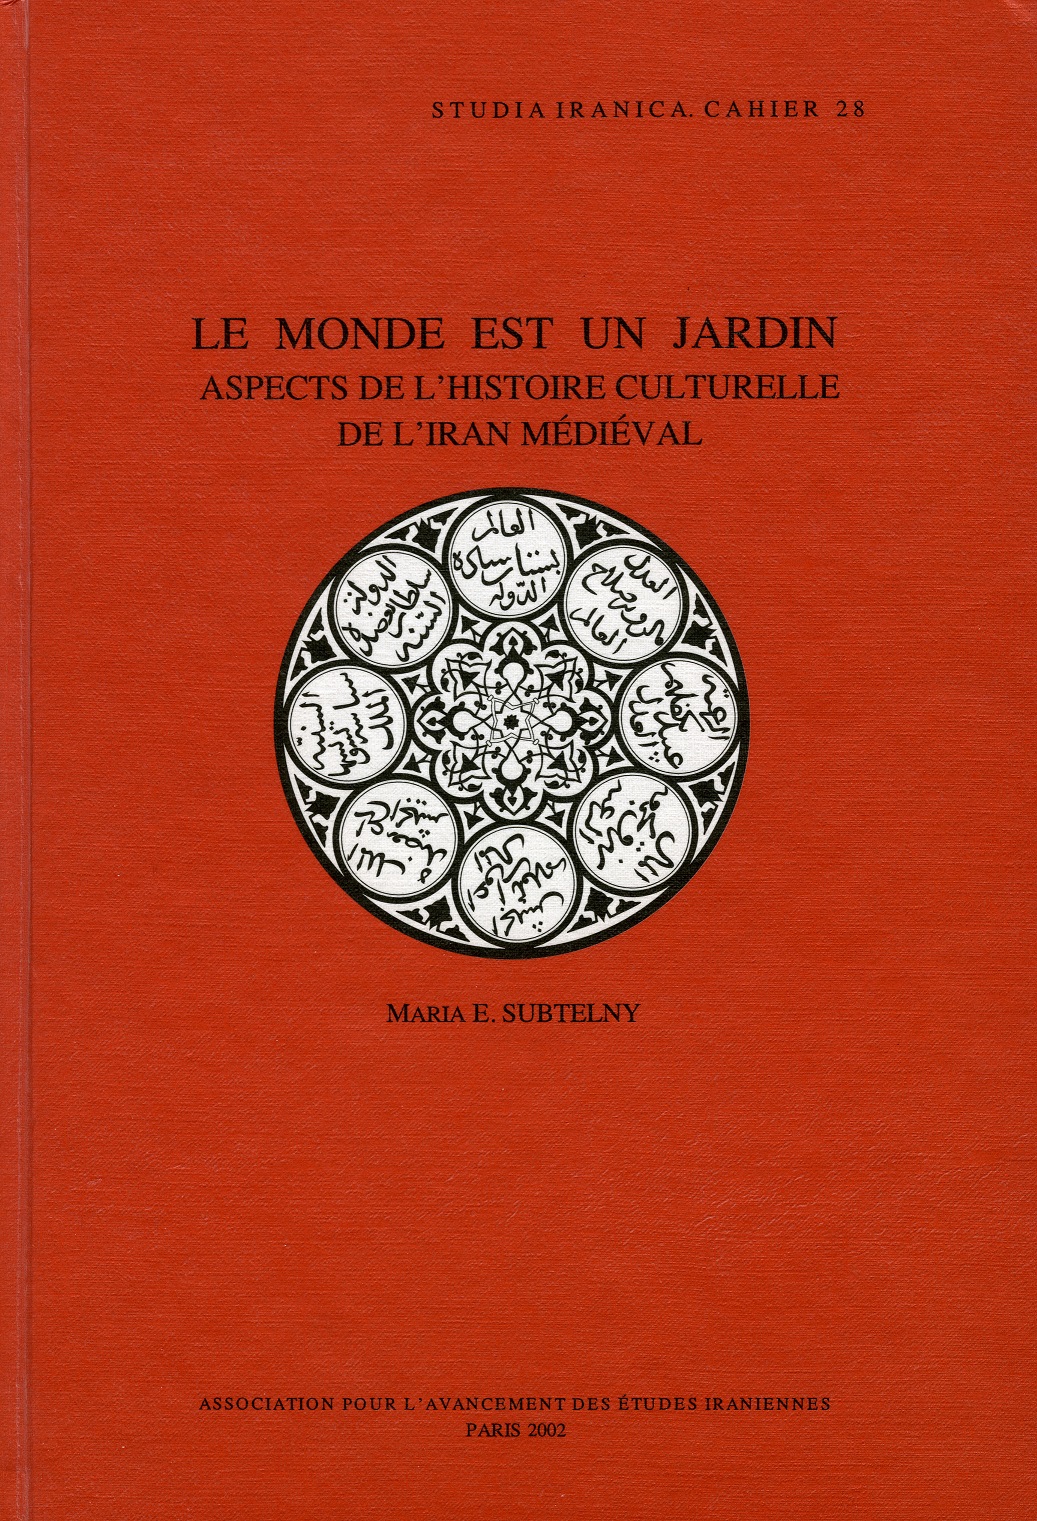 red book cover with a circular black and white pattern in the centre